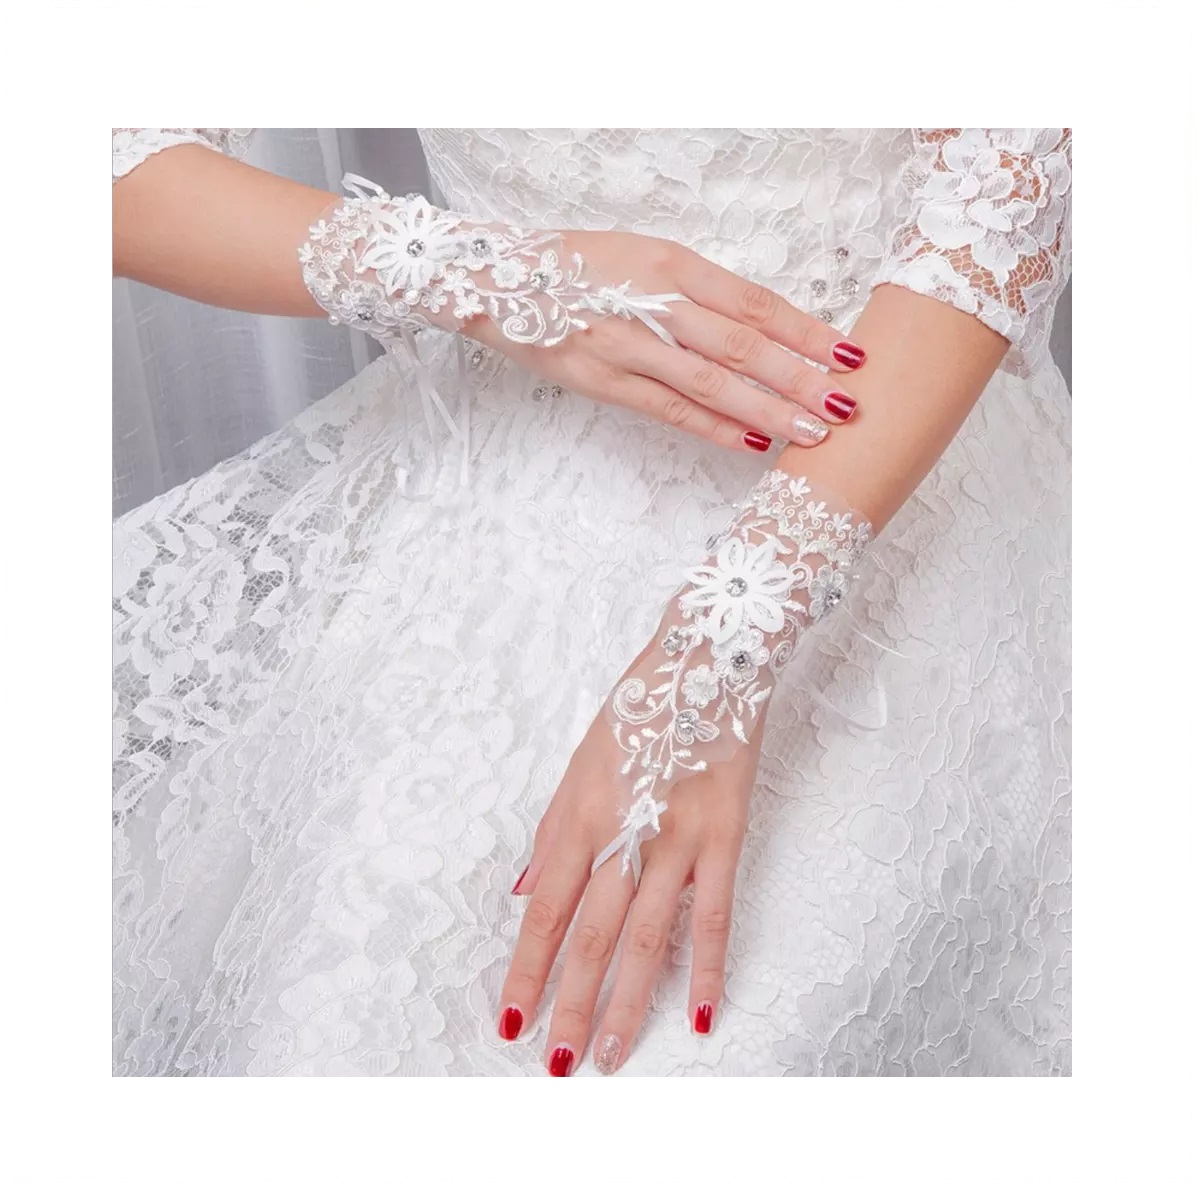 Embroidered Satin & Lace Bridal Gloves - Floral Lace Gloves studded with glittering crystals - White